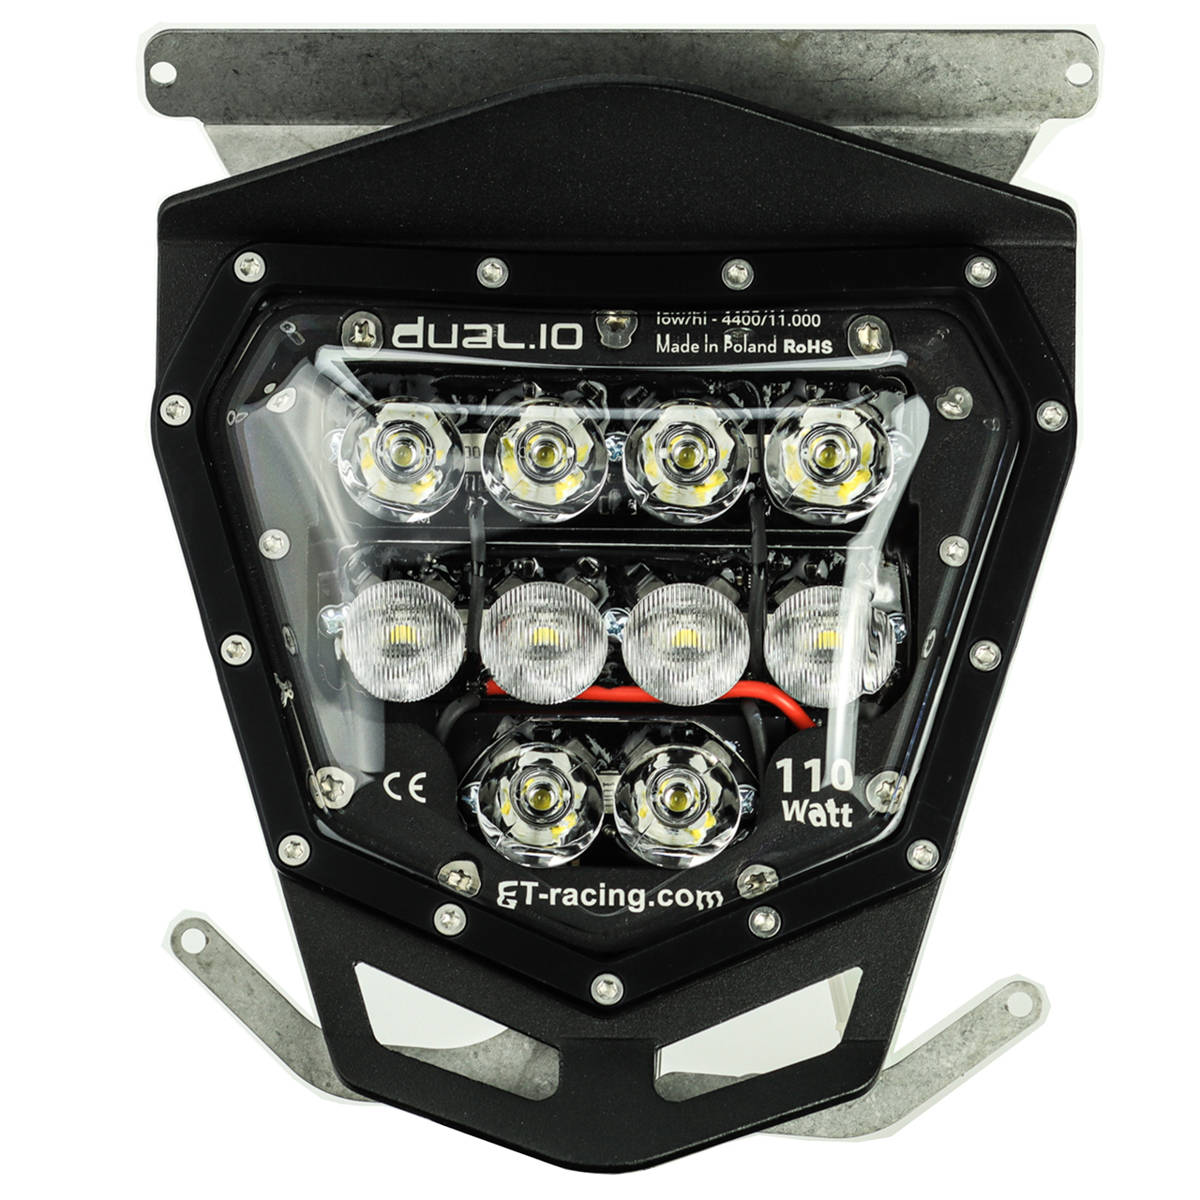 LED Headlight Dual.10 KTM 690 2012-16 only fuel injection